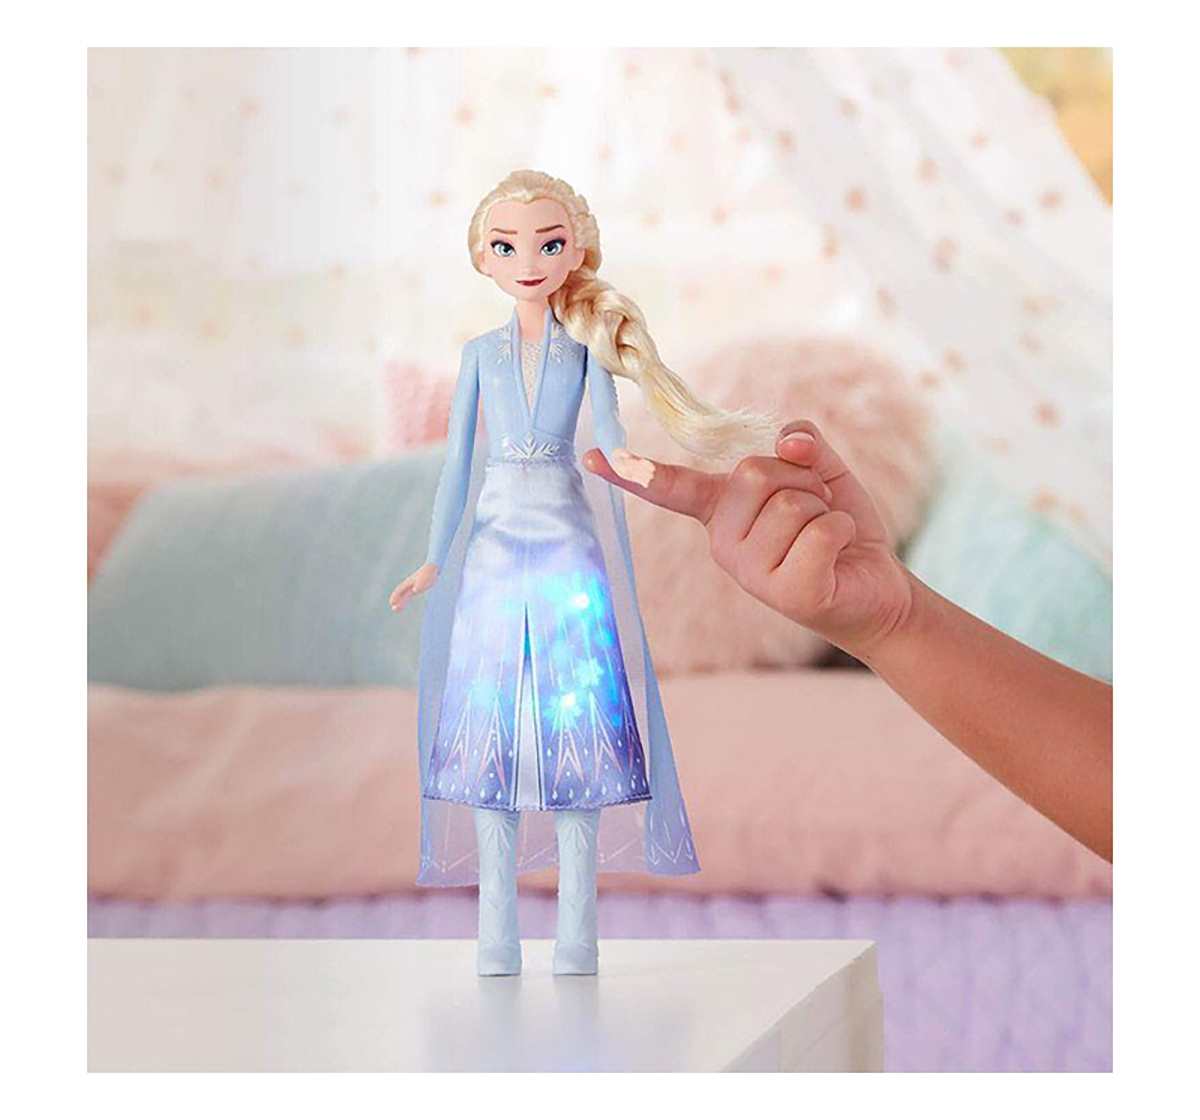 My Little Pony | Disney Frozen Elsa Magical Swirling Adventure Fashion Doll Assorted Dolls & Accessories for Girls age 3Y+ 3